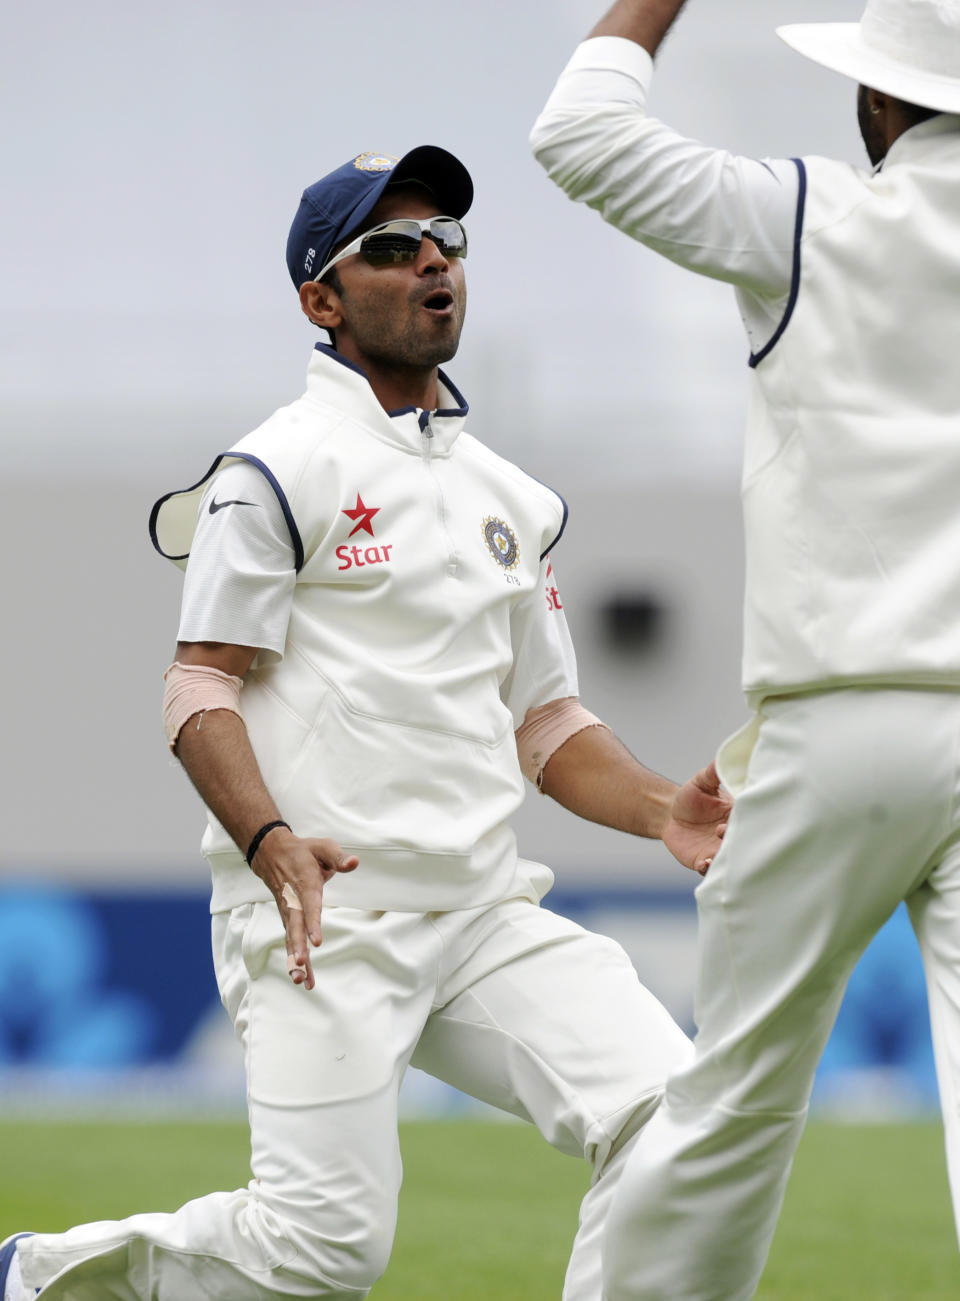 India’s Ajinkya Rahane, left, celebrates taking the catch to dismiss New Zealand’s Hamish Rutherford for 6 in the first cricket test at Eden Park in Auckland, New Zealand, Thursday, Feb. 6, 2014. (AP Photo/SNPA, Ross Setford) NEW ZEALAND OUT